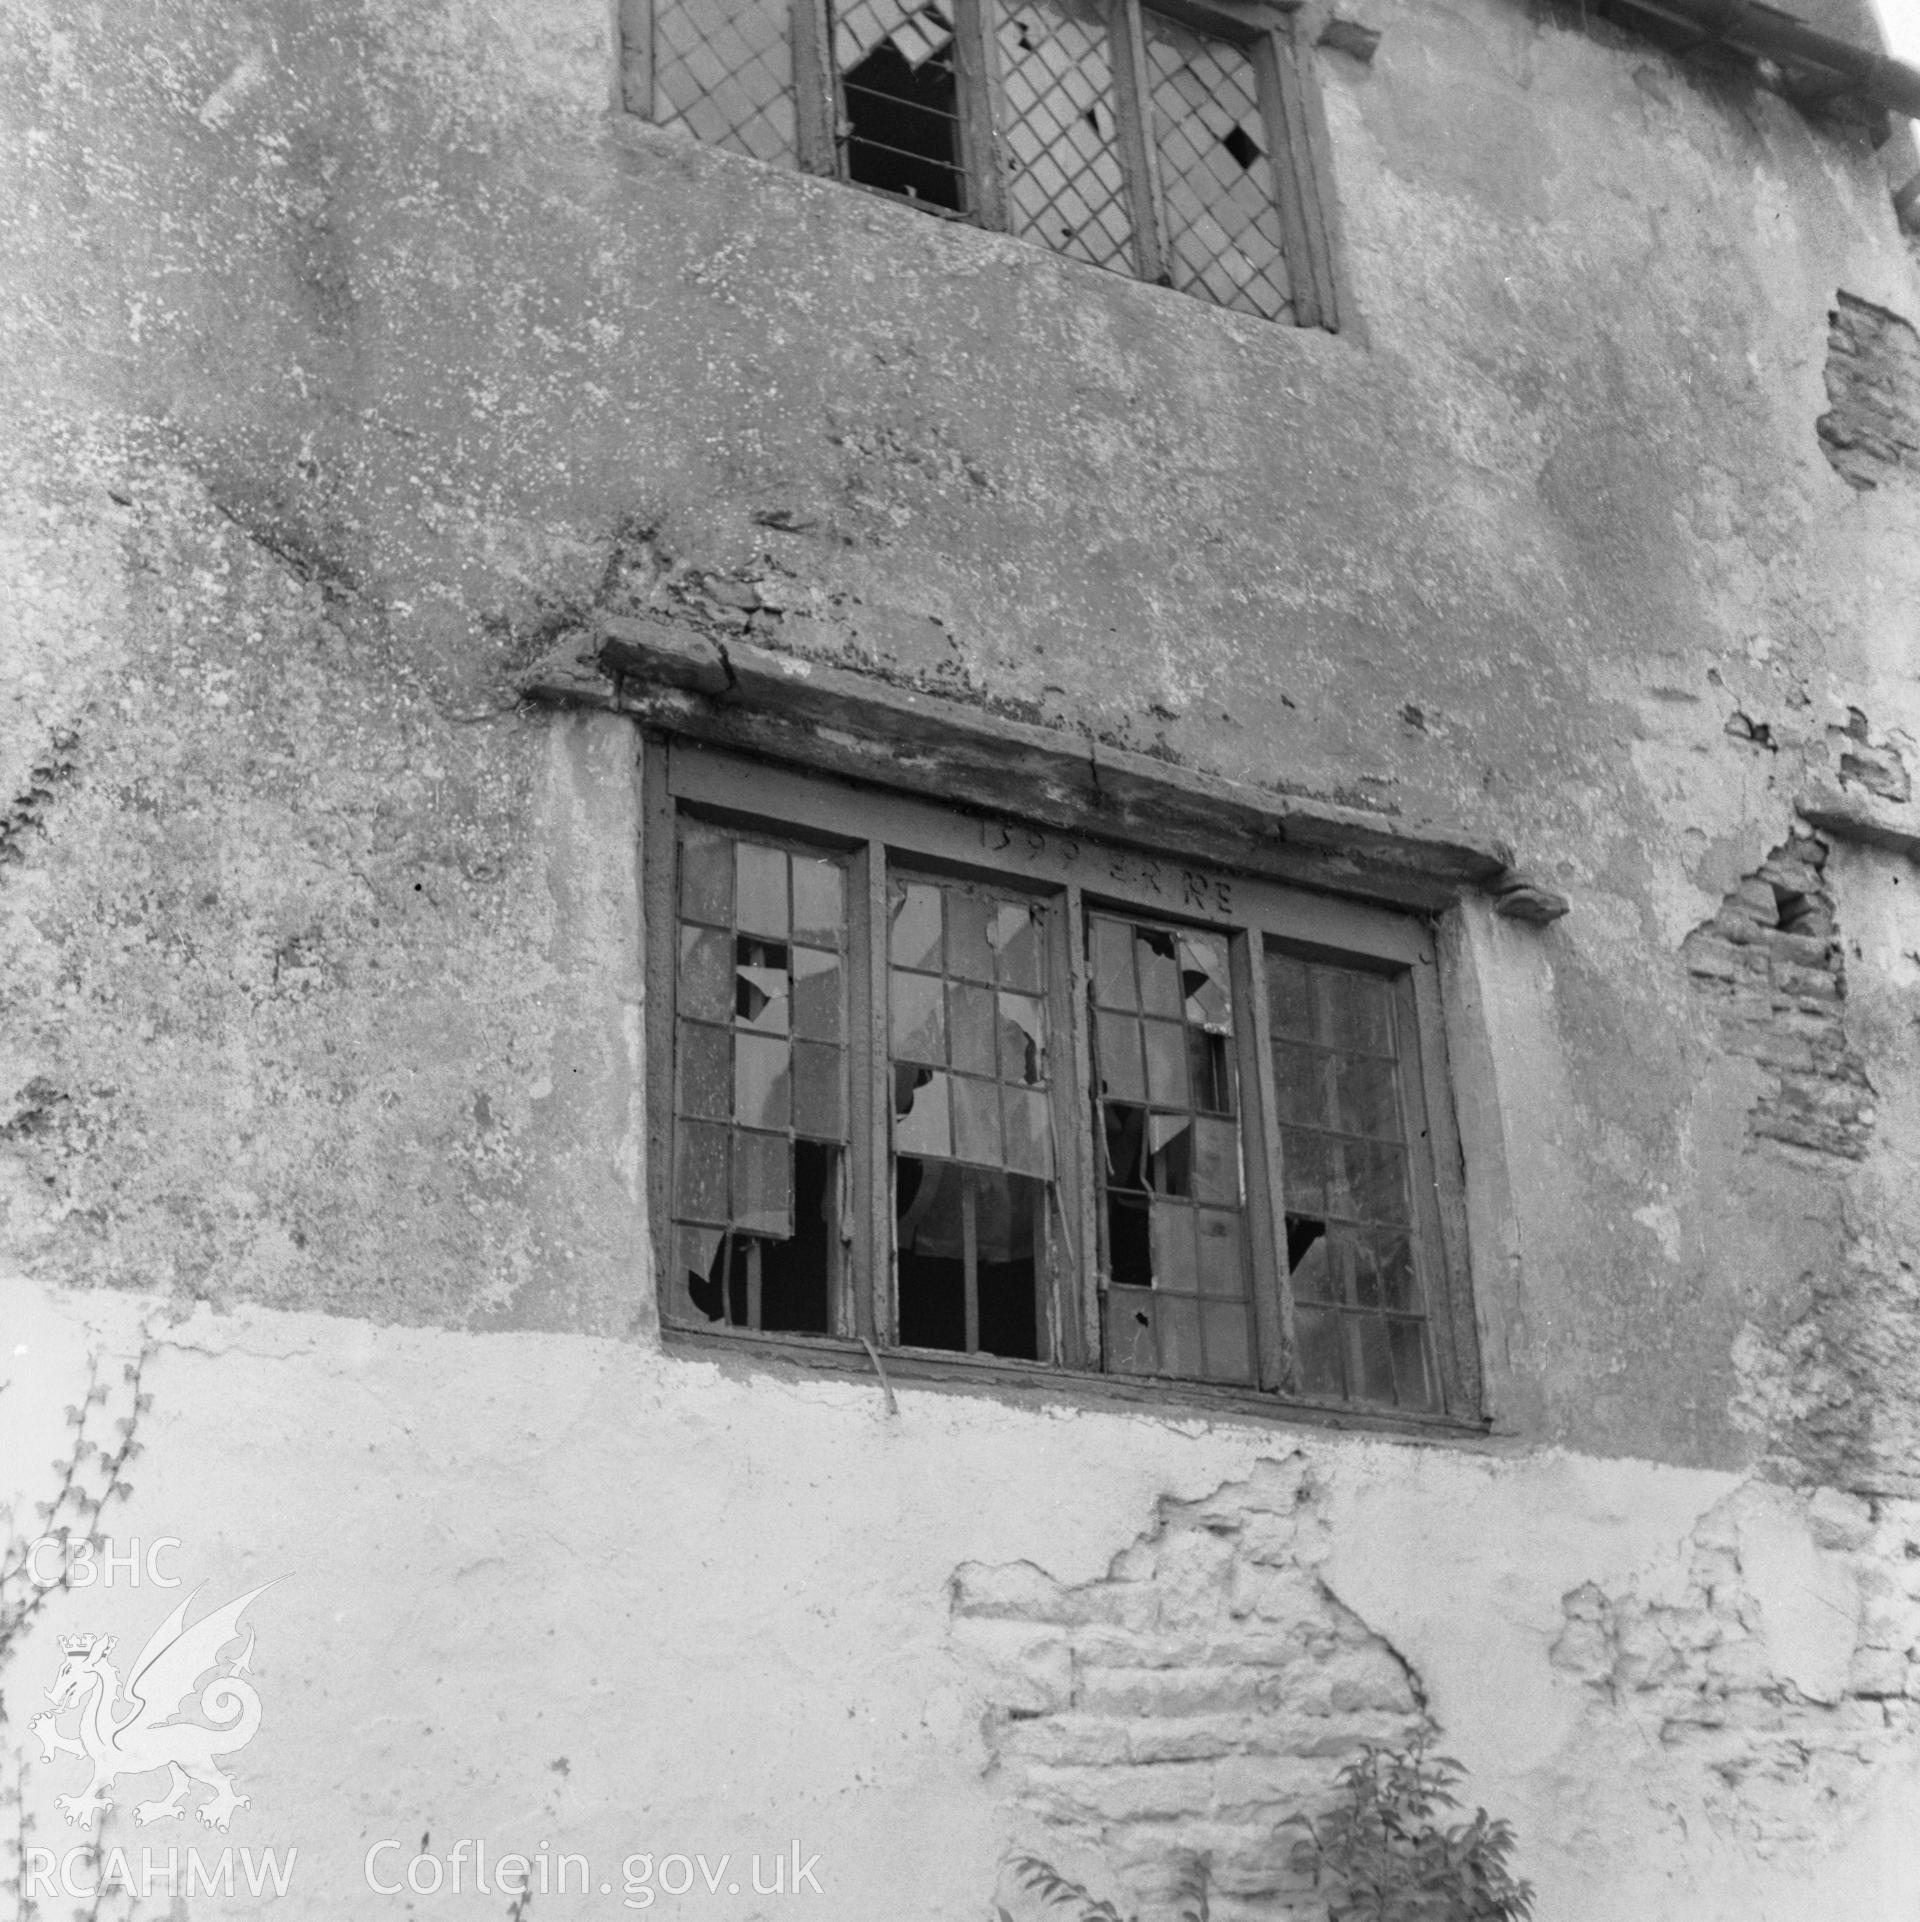 Exterior view showing close-up of window